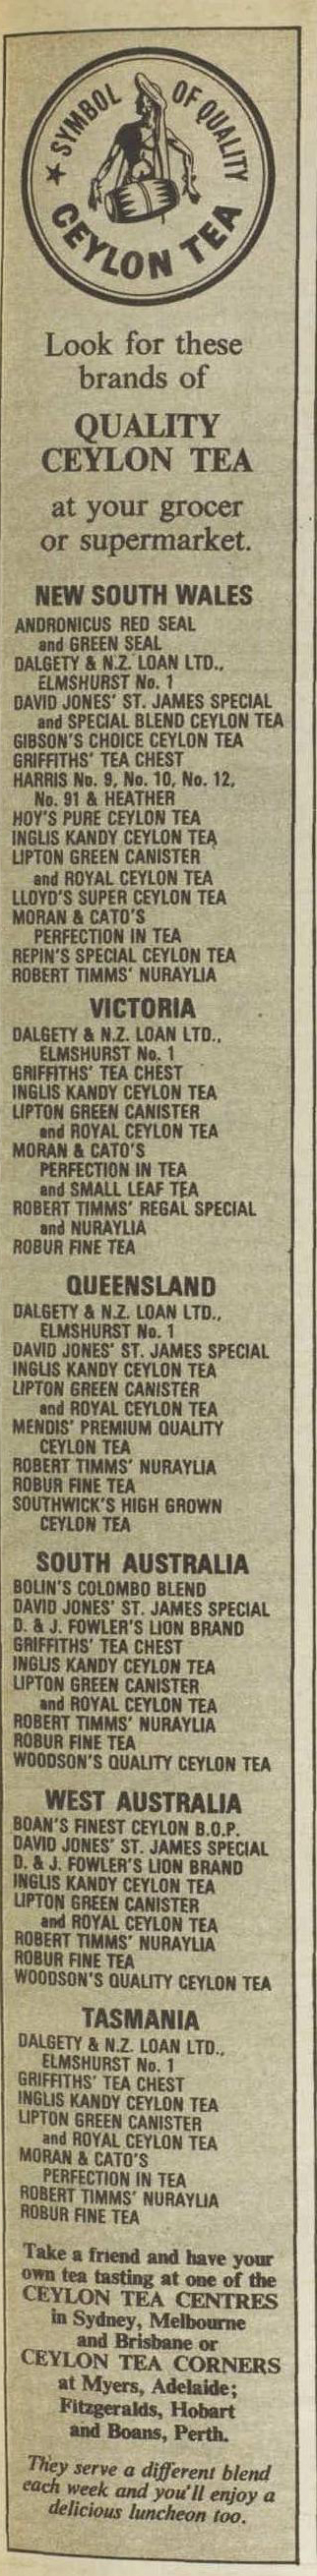 90.Quality Ceylon Tea - Look for these brands